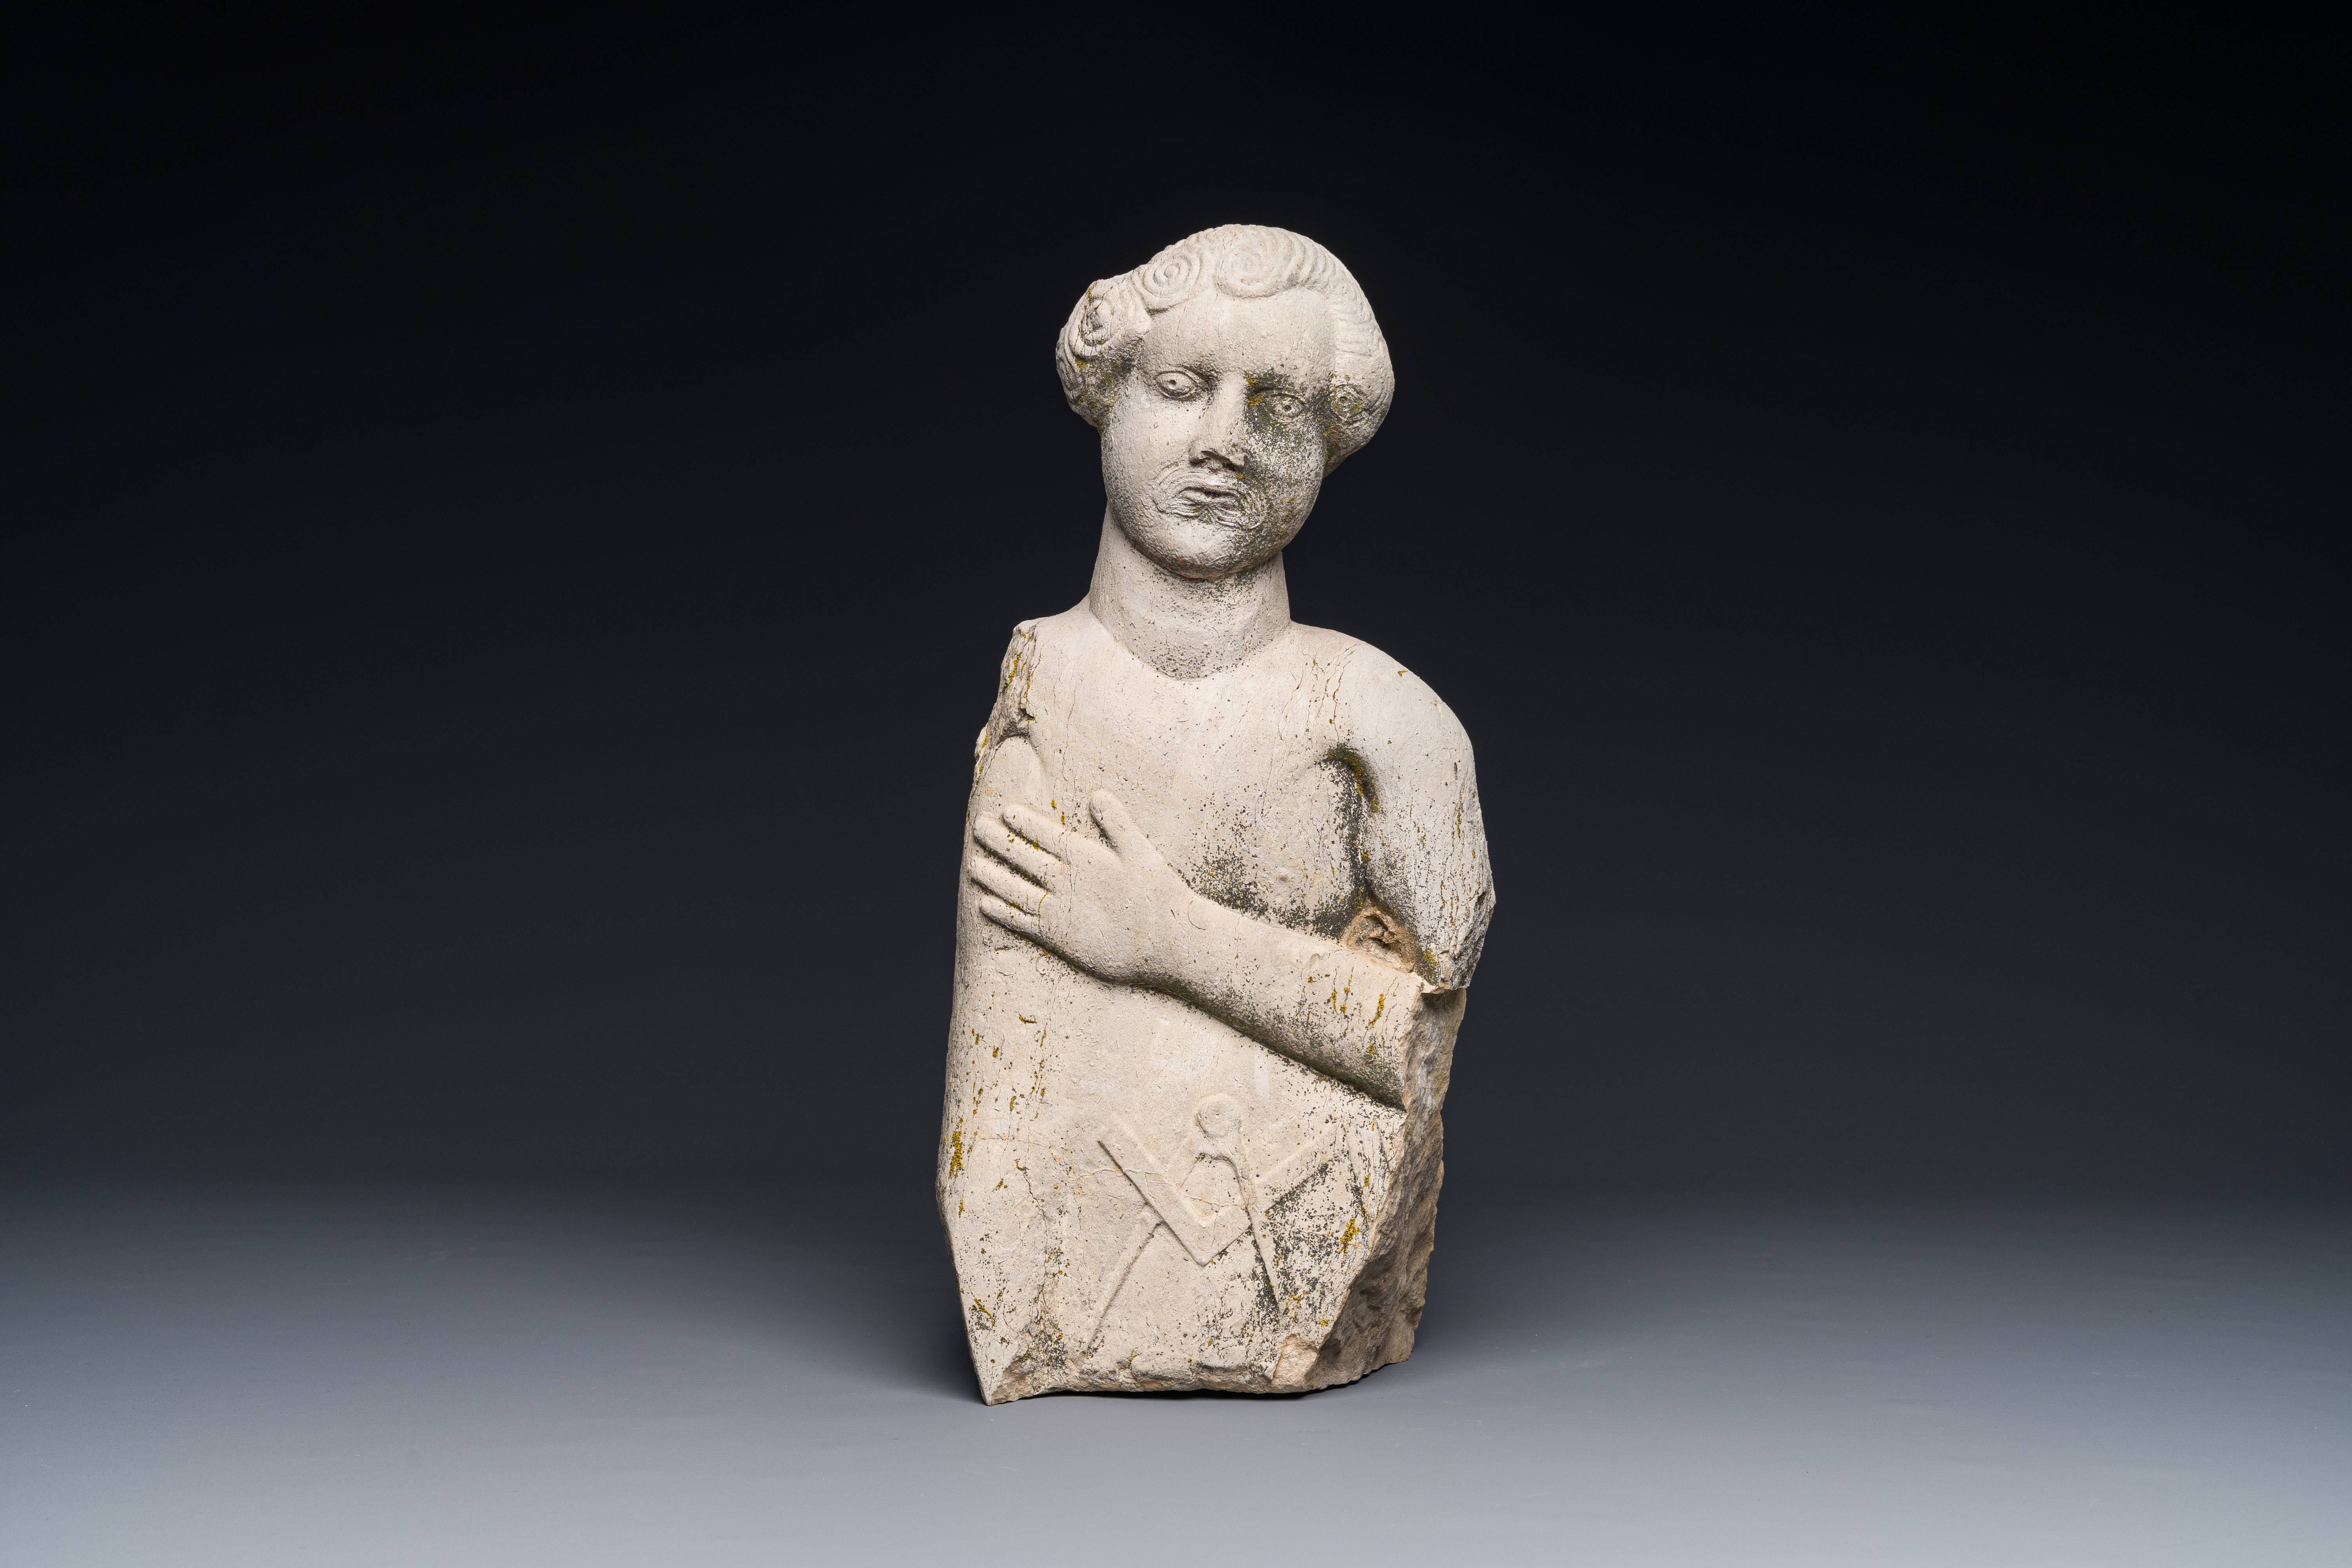 A stone sculpture of a man with the Freemasonry logo, probably France, 18th C. - Image 3 of 9